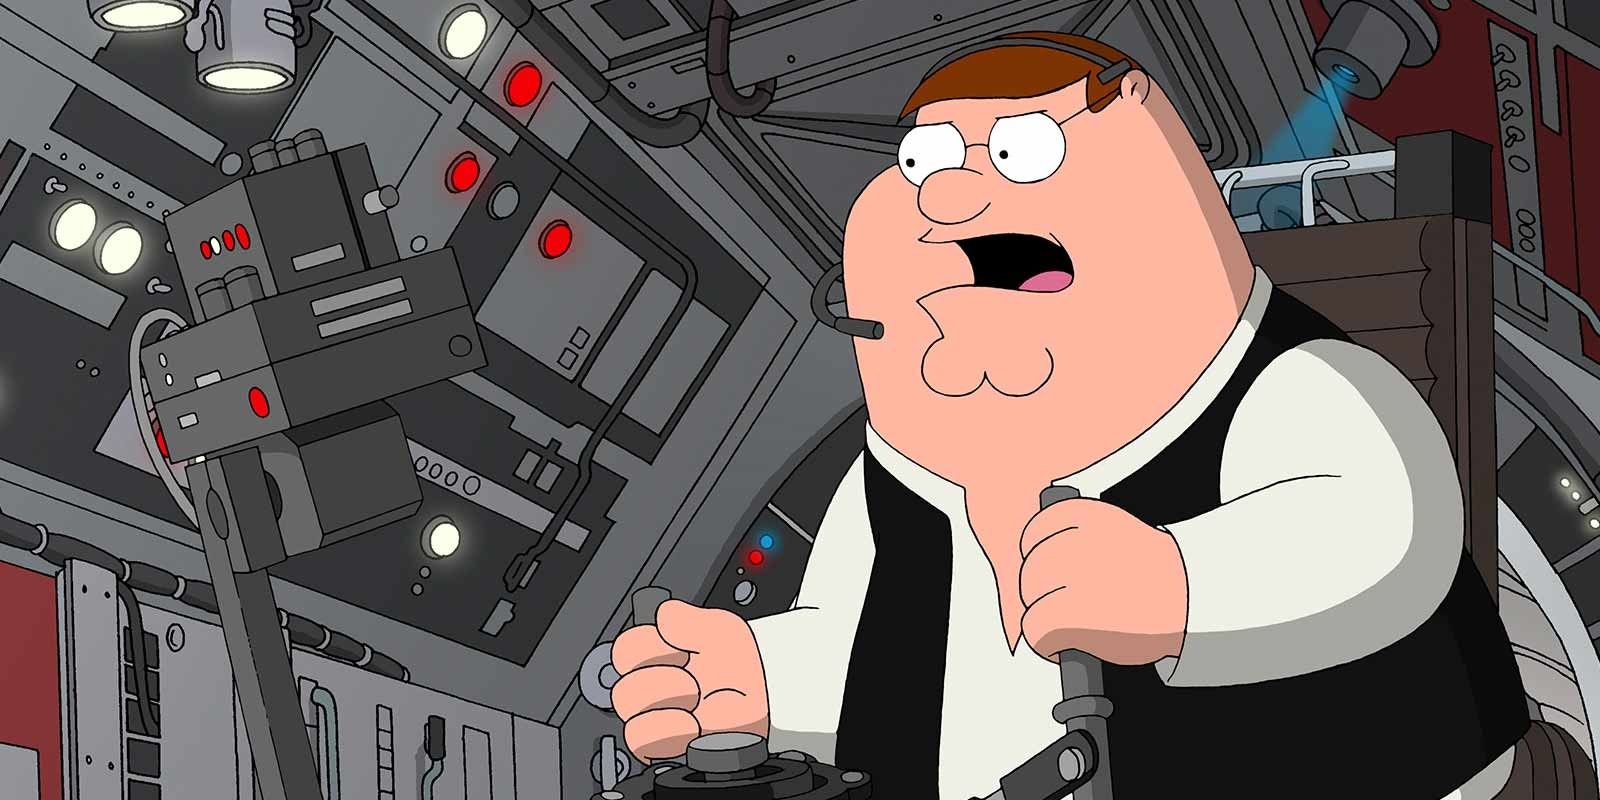 Family Guy's Top 10 Episodes All Share The Same Thing In Common (Except 1)